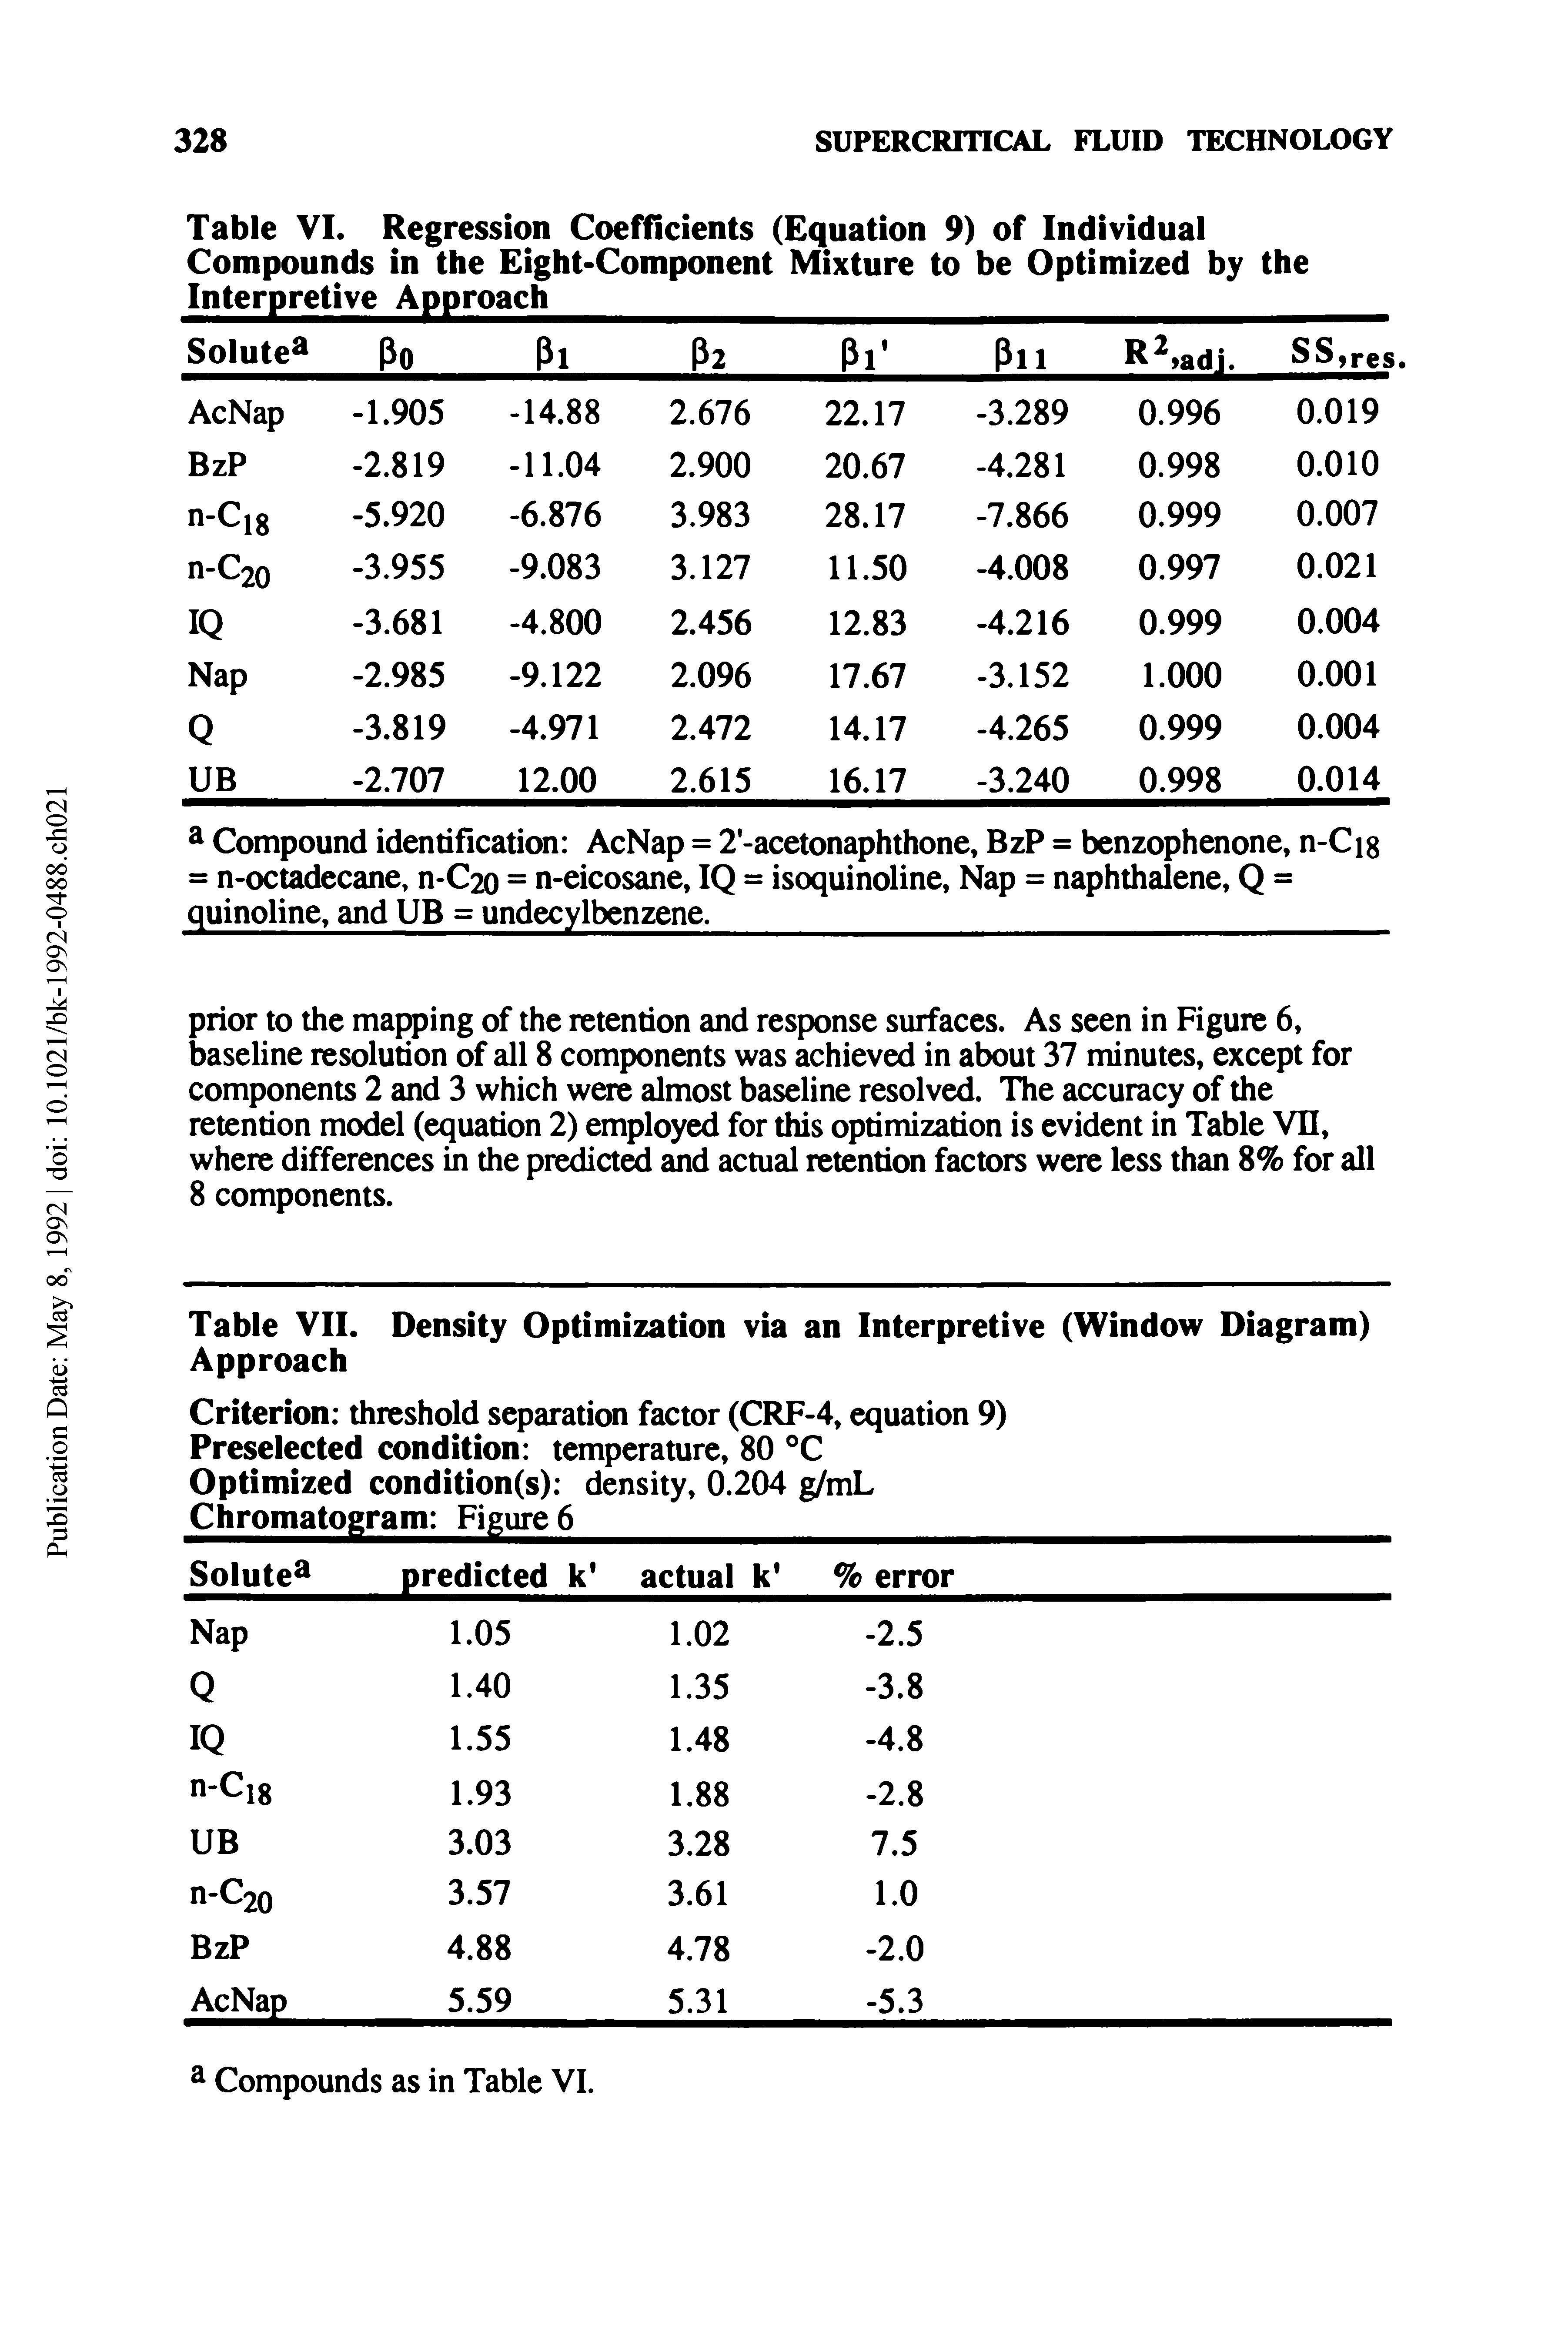 Table VI. Regression Coefficients (Equation 9) of Individual Compounds in the Eight-Component Mixture to be Optimized by the Interpretive Approach...